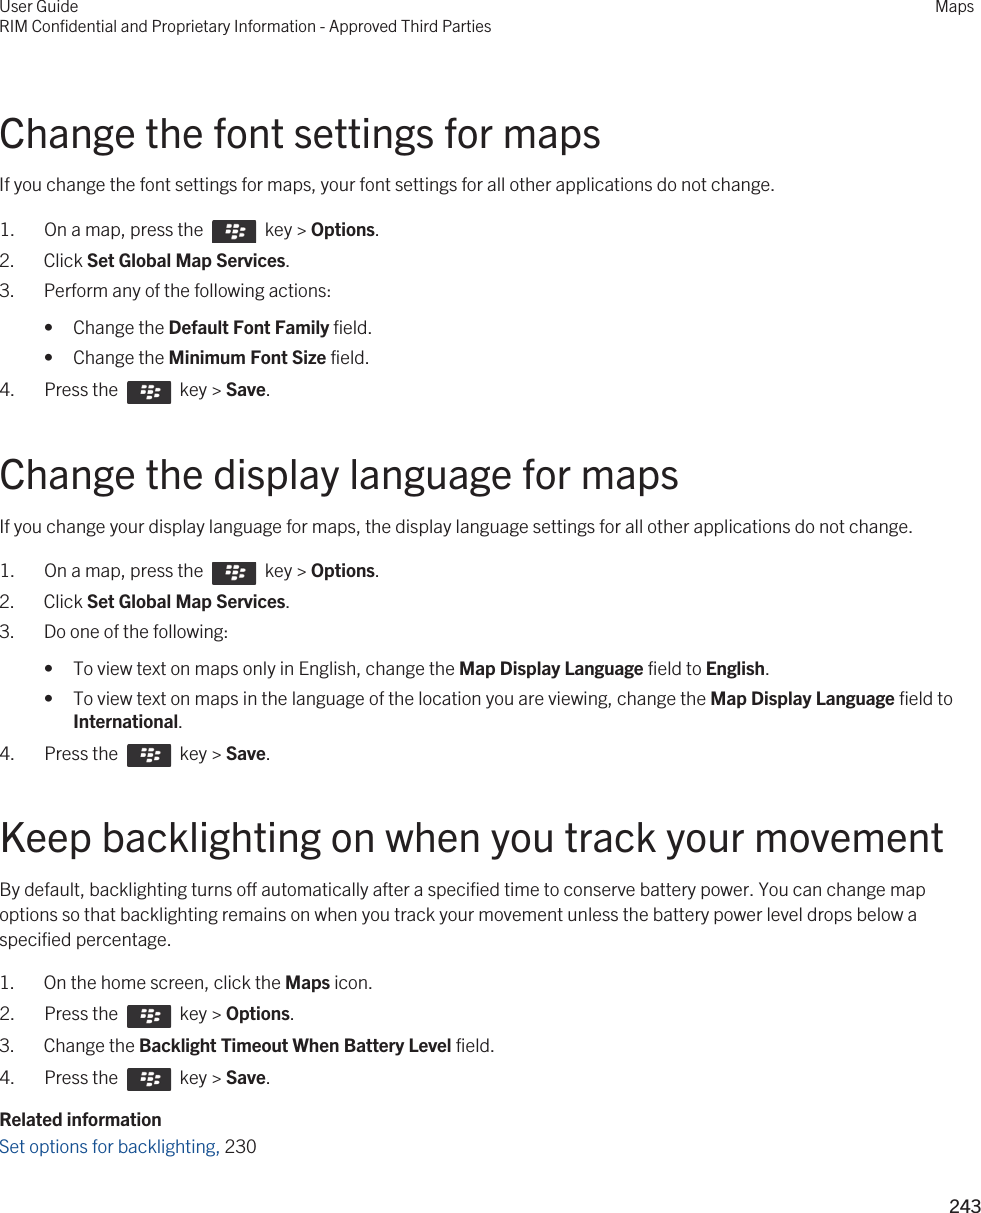 Change the font settings for mapsIf you change the font settings for maps, your font settings for all other applications do not change.1.  On a map, press the    key &gt; Options.2. Click Set Global Map Services.3. Perform any of the following actions:• Change the Default Font Family field.• Change the Minimum Font Size field.4.  Press the    key &gt; Save. Change the display language for mapsIf you change your display language for maps, the display language settings for all other applications do not change.1.  On a map, press the    key &gt; Options.2. Click Set Global Map Services.3. Do one of the following:• To view text on maps only in English, change the Map Display Language field to English.• To view text on maps in the language of the location you are viewing, change the Map Display Language field to International.4.  Press the    key &gt; Save. Keep backlighting on when you track your movementBy default, backlighting turns off automatically after a specified time to conserve battery power. You can change map options so that backlighting remains on when you track your movement unless the battery power level drops below a specified percentage.1. On the home screen, click the Maps icon.2.  Press the    key &gt; Options. 3. Change the Backlight Timeout When Battery Level field.4.  Press the    key &gt; Save. Related informationSet options for backlighting, 230 User GuideRIM Confidential and Proprietary Information - Approved Third PartiesMaps243 